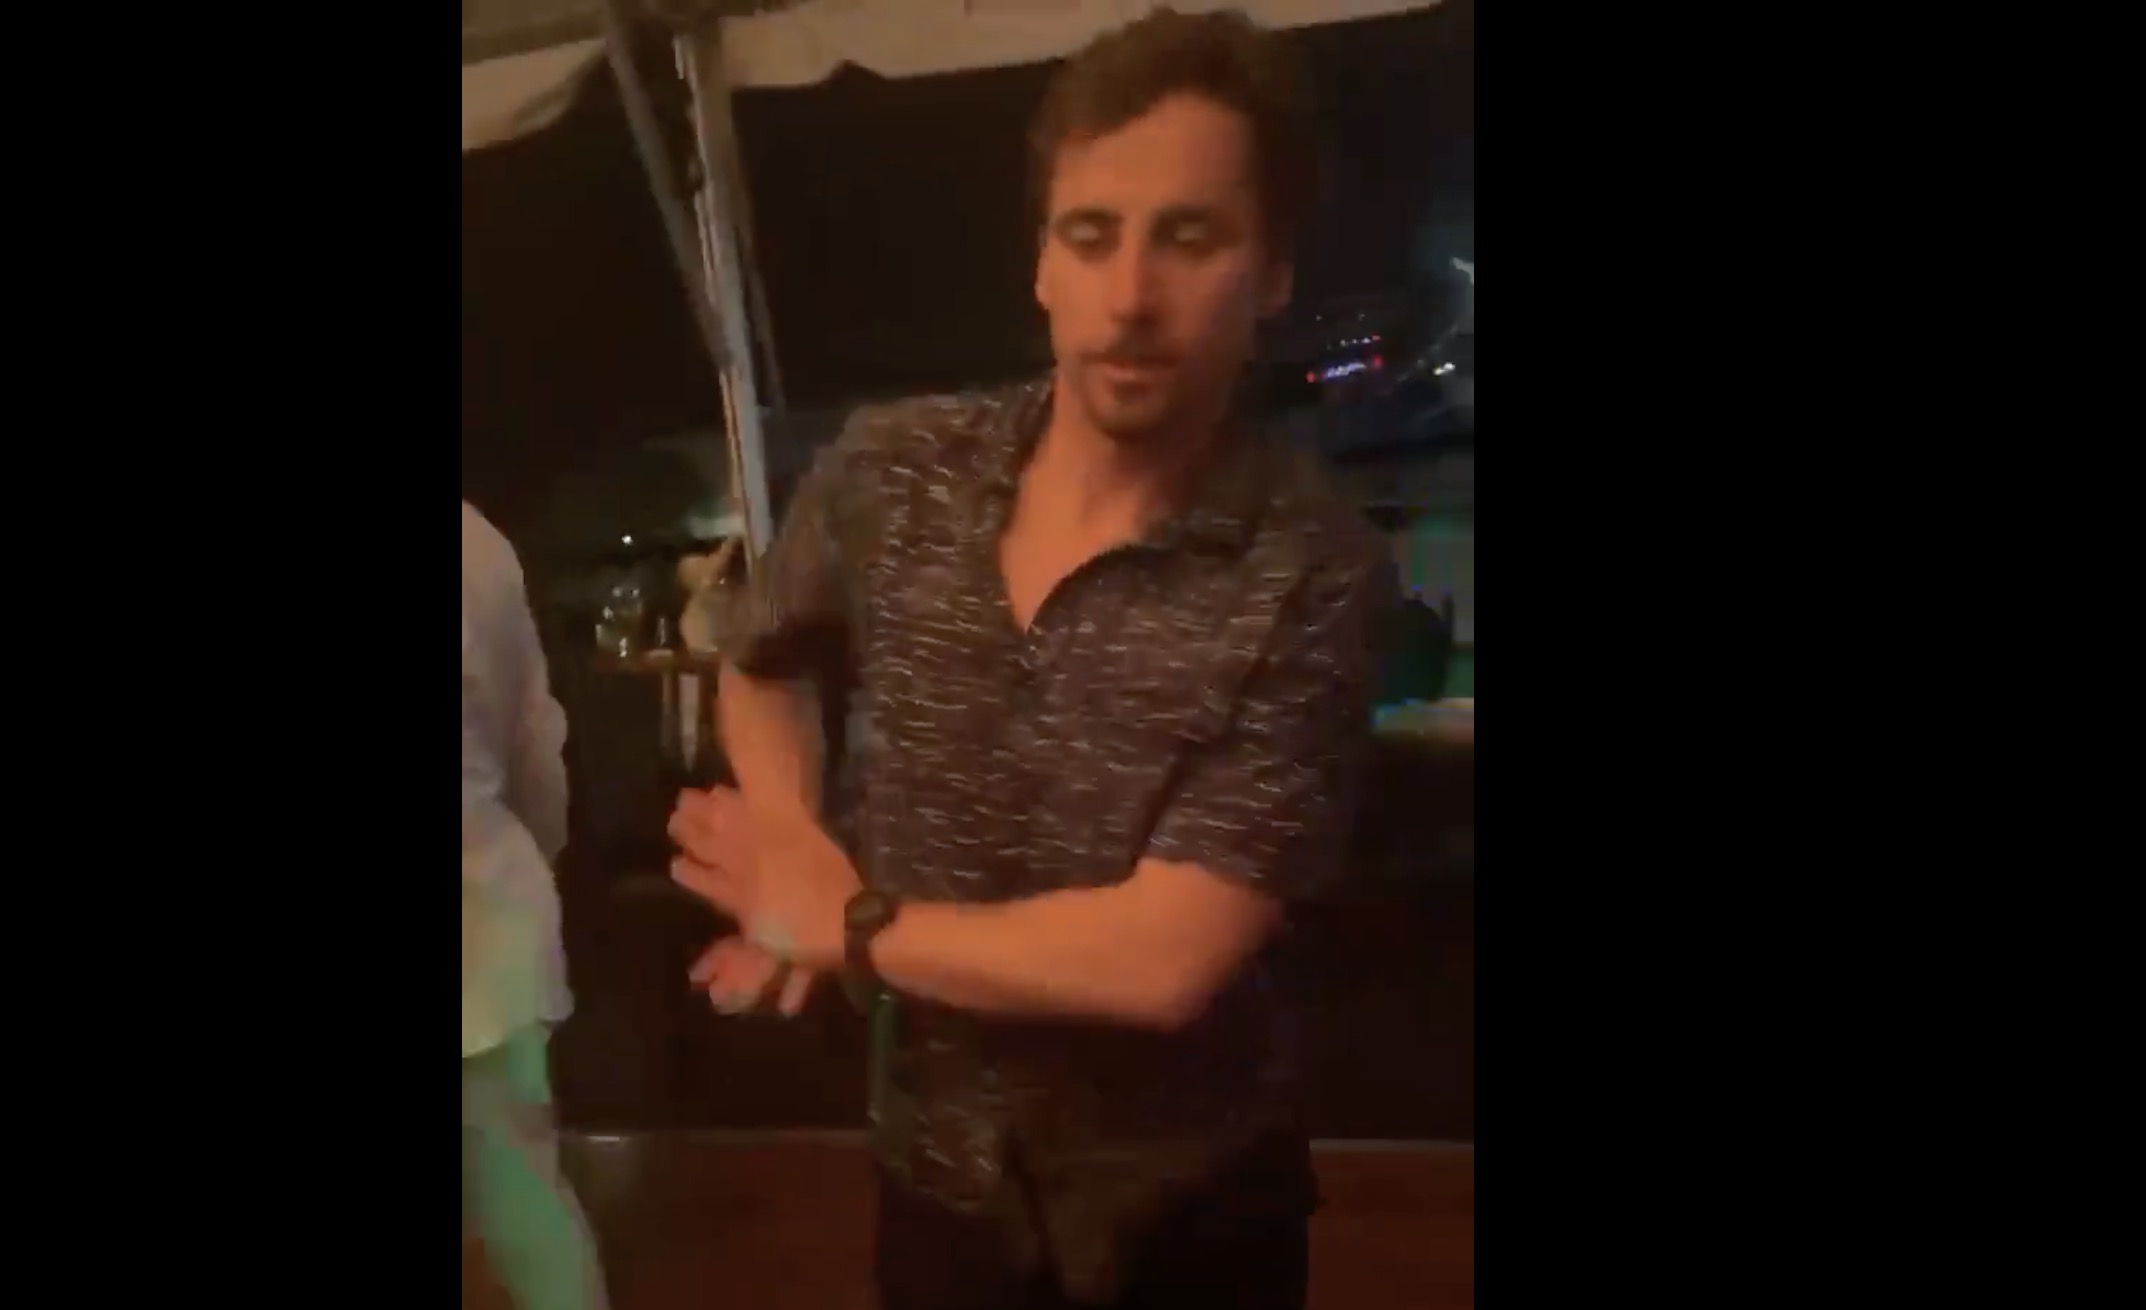 guy rips pants dancing, exposes everything